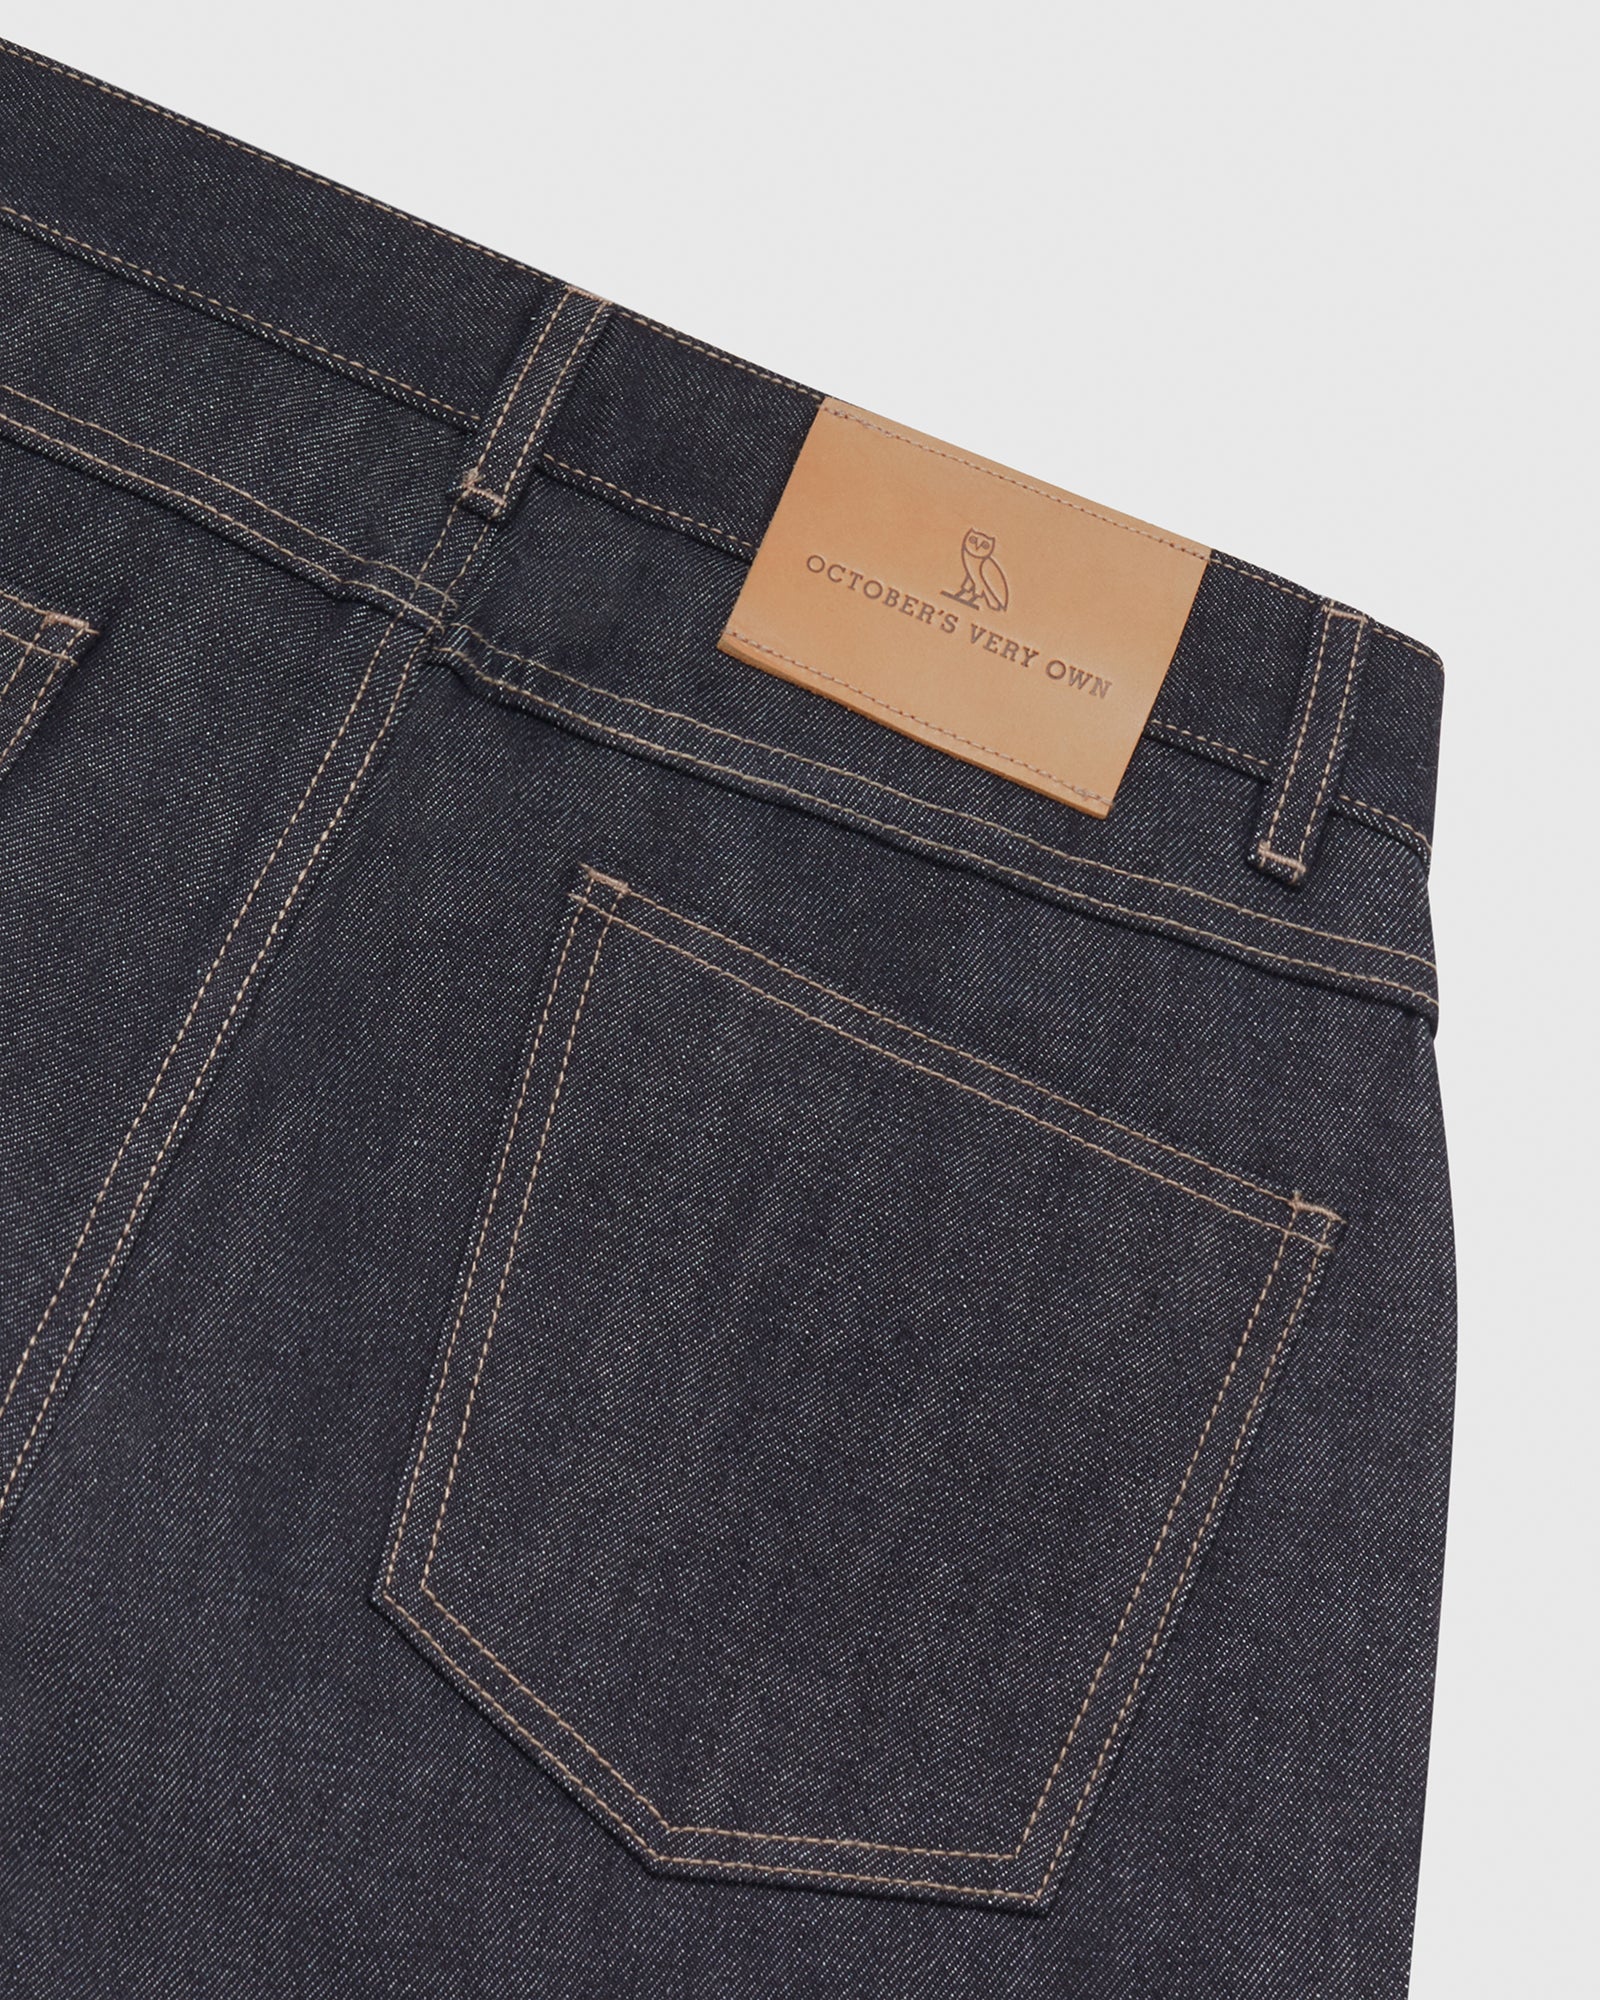 5 Pocket Relaxed Fit Jean - Raw Indigo IMAGE #5